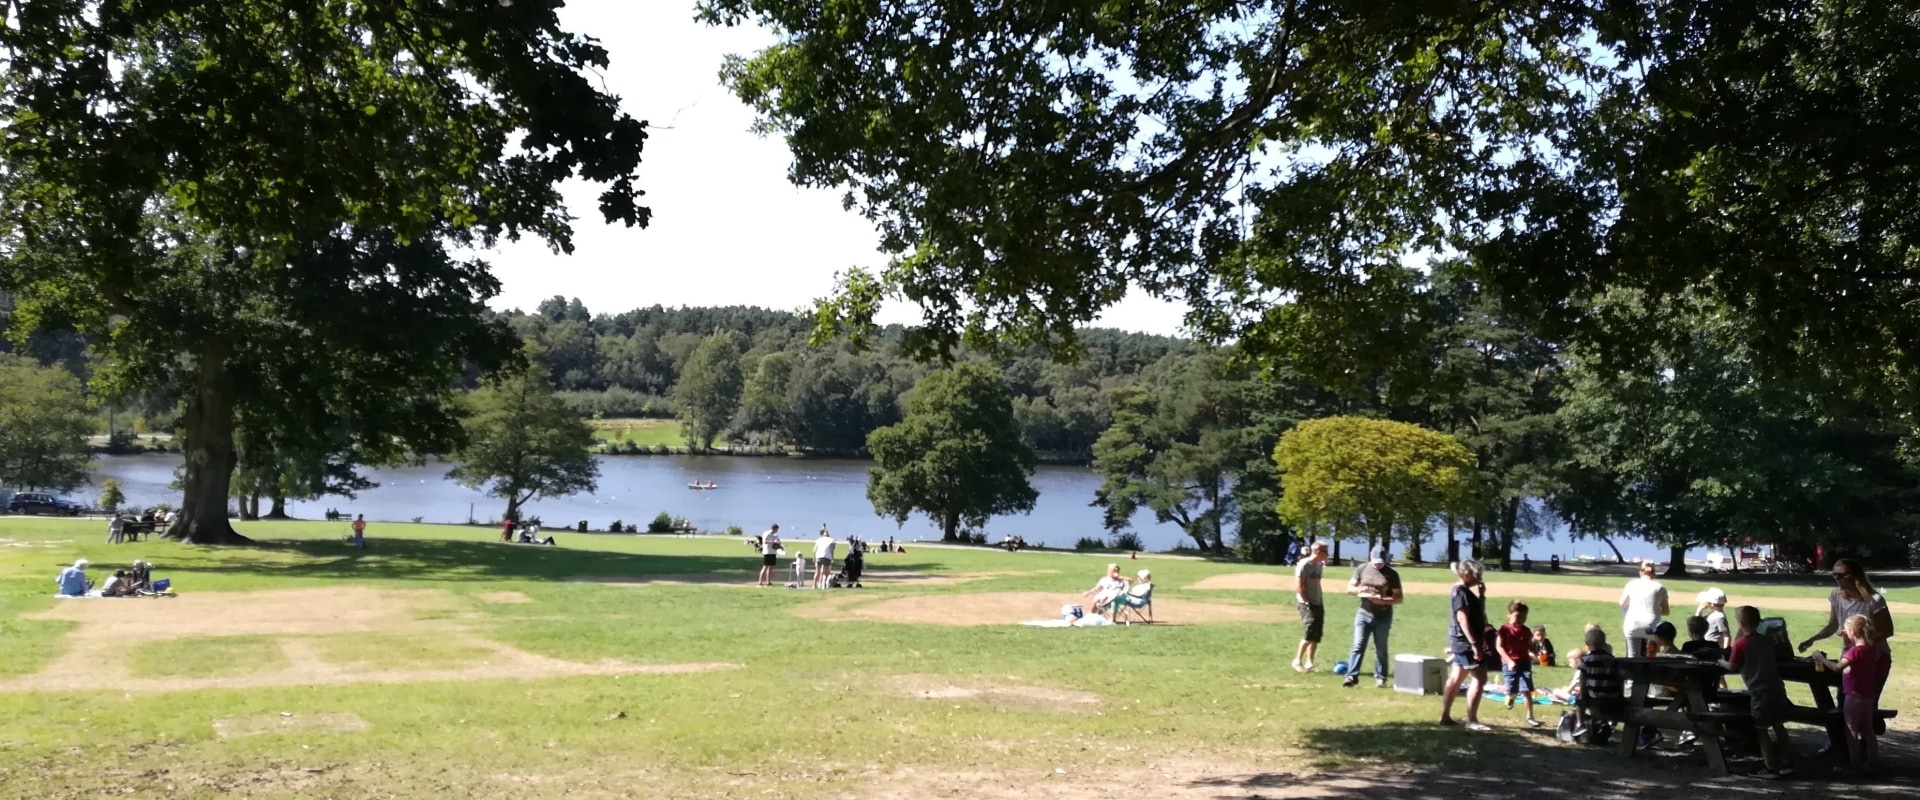 Exploring Tilgate Park: A Guide to Crawley's Most Beautiful Park